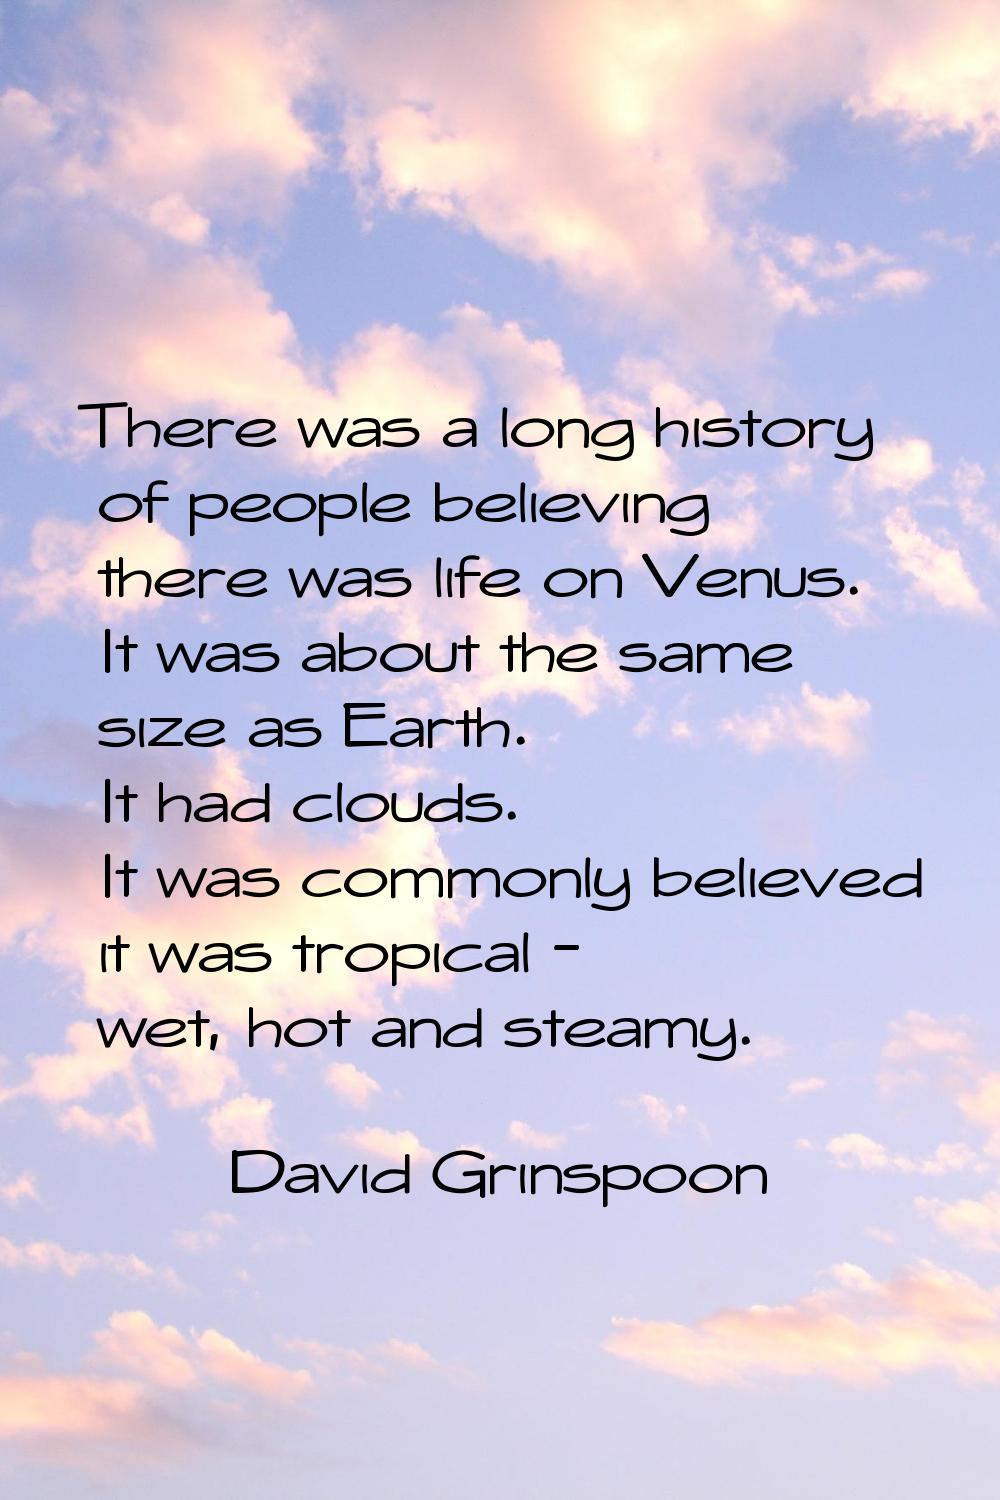 There was a long history of people believing there was life on Venus. It was about the same size as